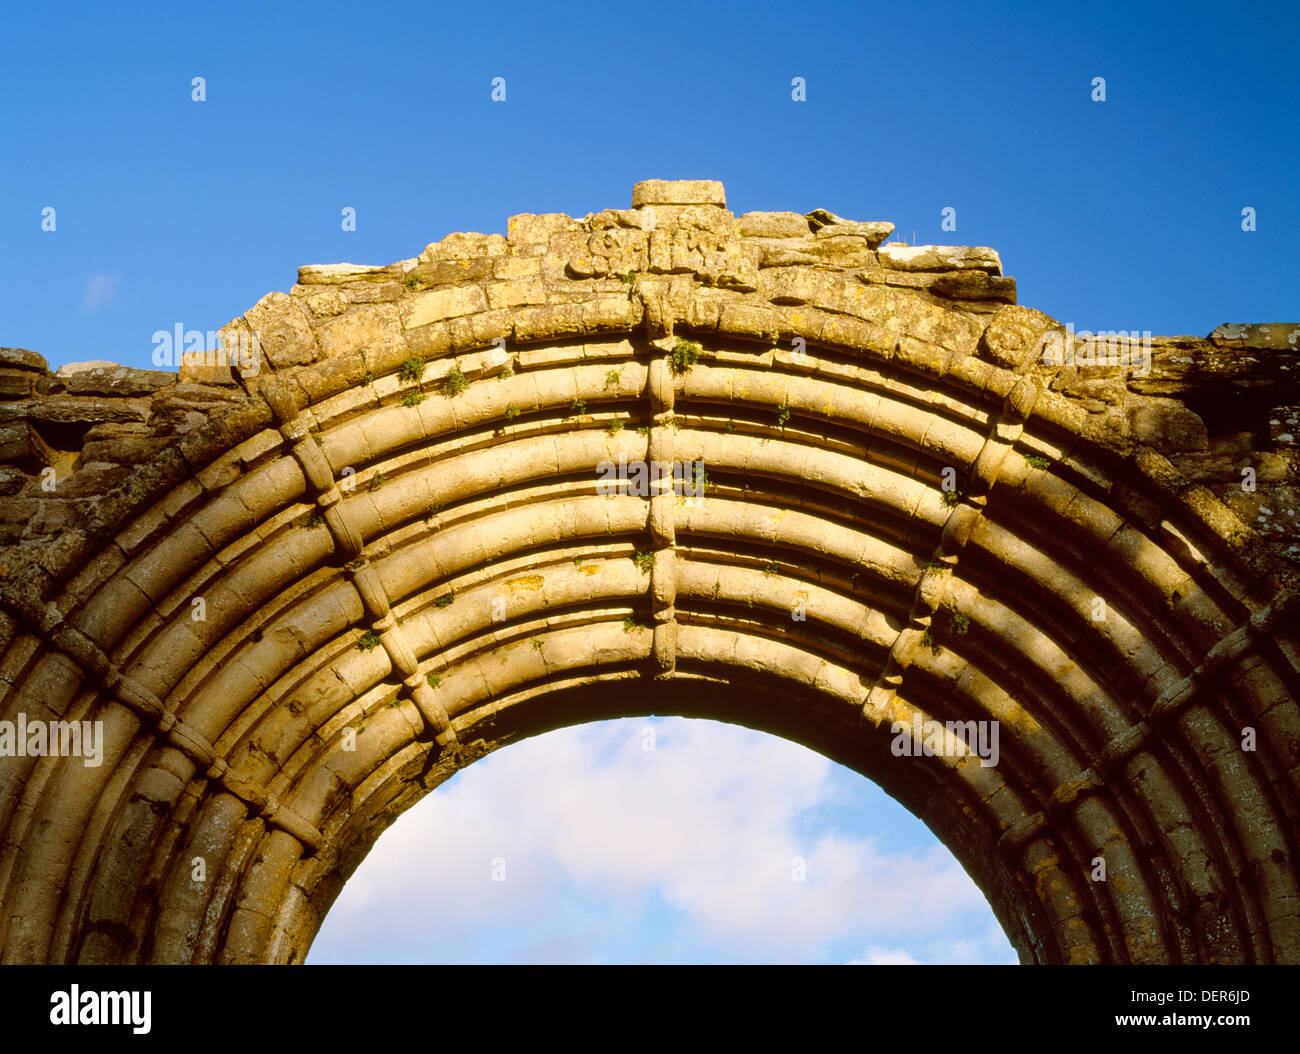 Strata Florida, Ceredigion: detail of exterior face of the magnificent W doorway arch of the C13th Cistercian abbey church in late-afternoon sunshine. Stock Photo